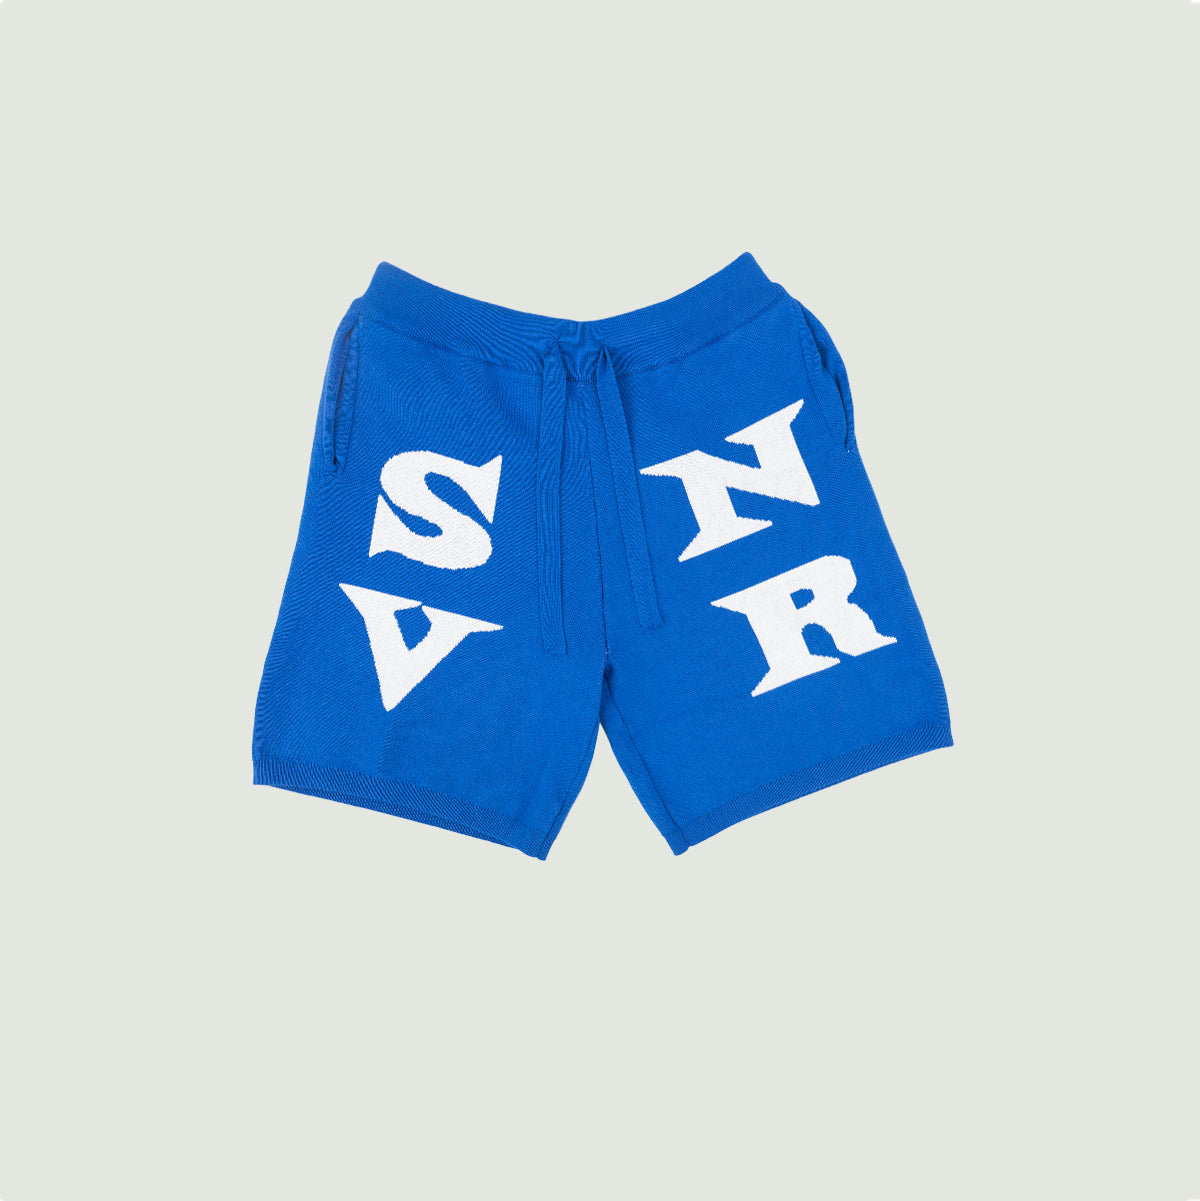 S STAR KNITTED SHORTS (BLUE)